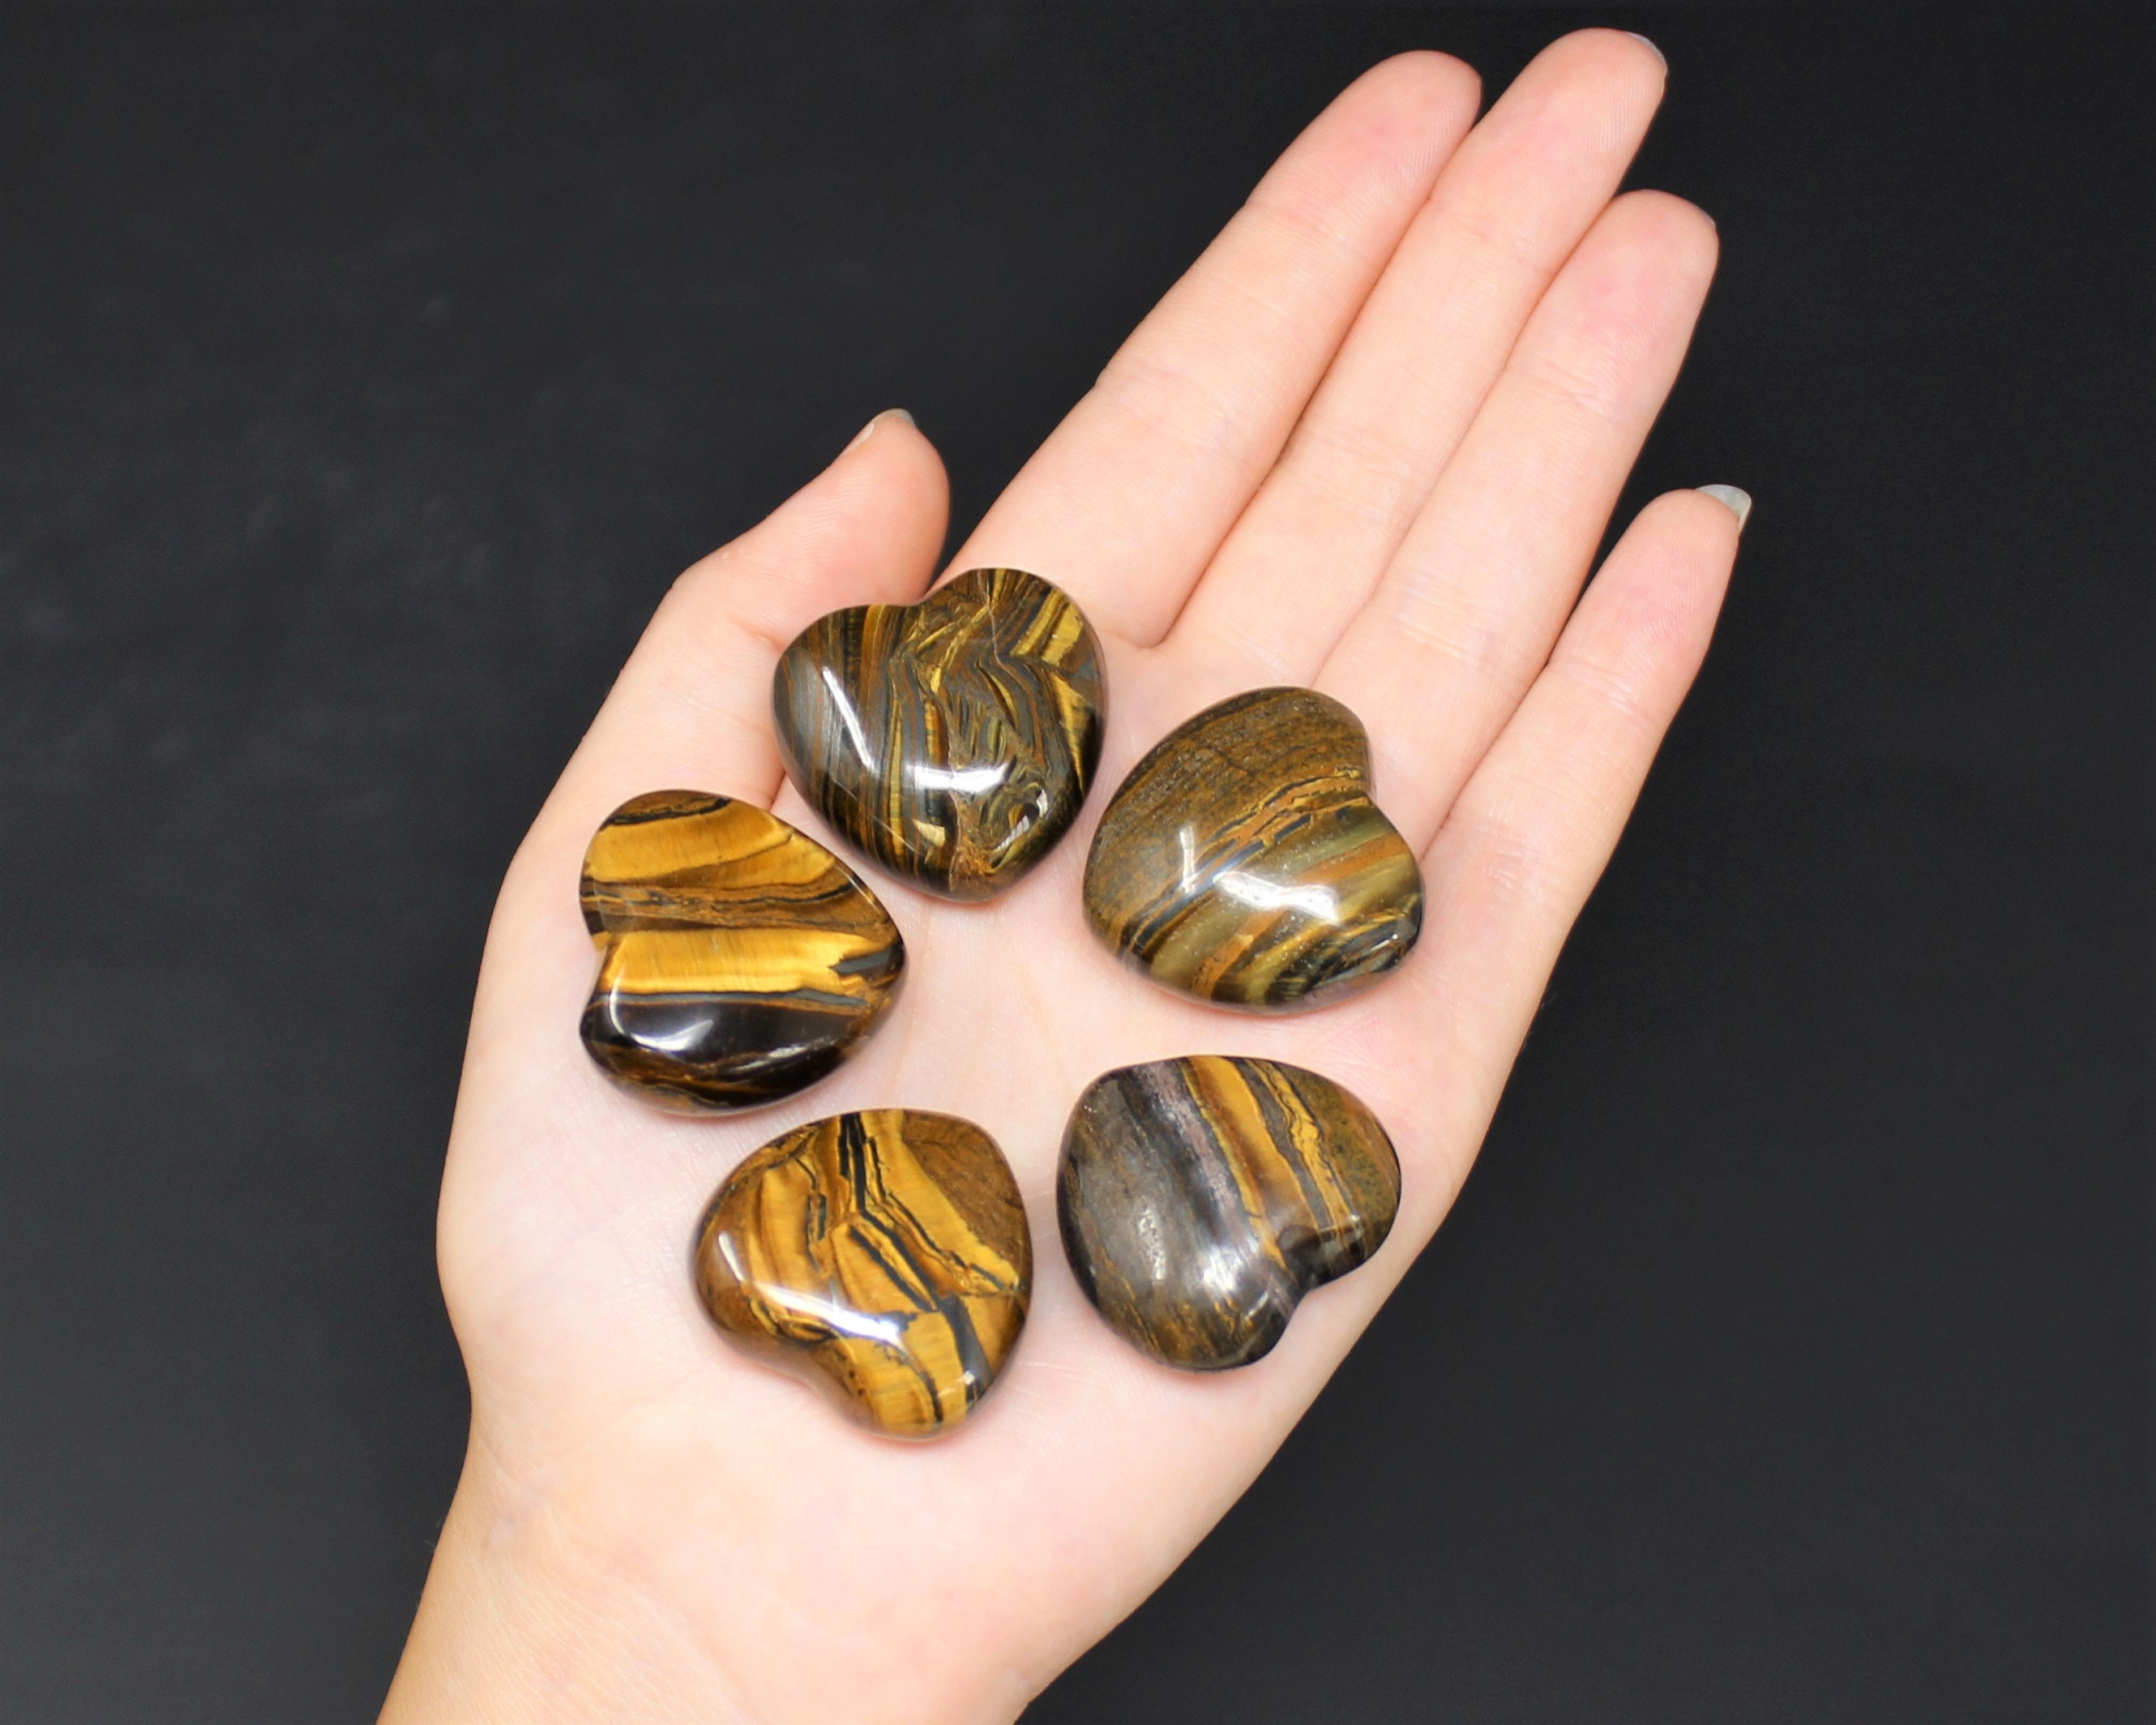 30mm Golden Yellow Tiger Eye Heart Natural Sparkling Mineral Heart Chatoyant Crystal Heart-Shaped Polished Hawk's Eye Gemstone